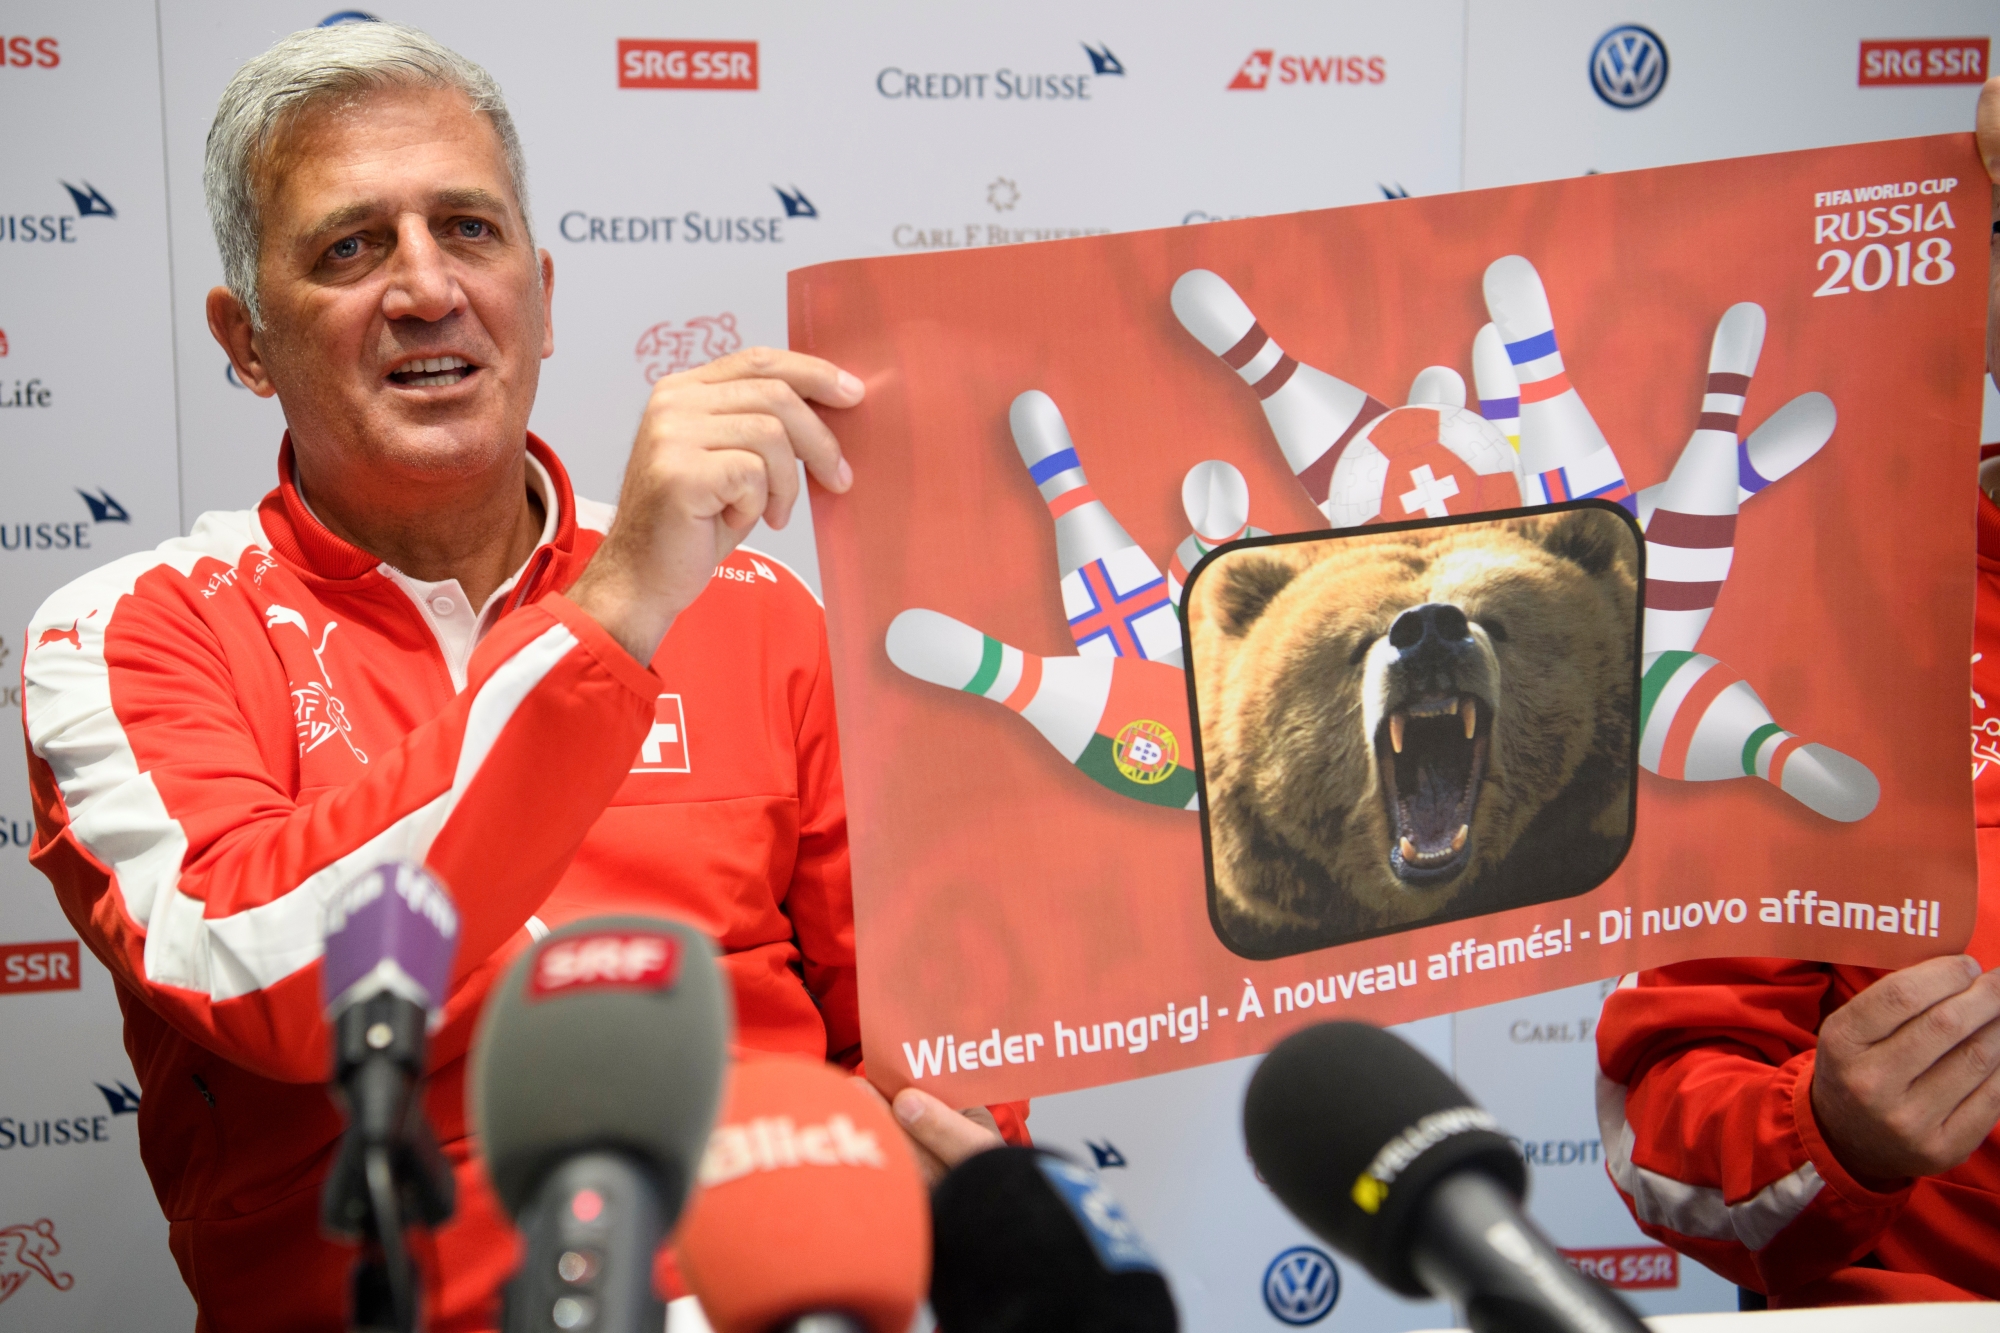 Swiss head coach Vladimir Petkovic shows a poster with a bear during a press conference of the Switzerland soccer national team, in Lausanne, Switzerland, Tuesday, March 21, 2017. Switzerland will plays Latvia next saturday in Geneva for an 2018 Fifa World Cup group B qualification soccer match. (KEYSTONE/Laurent Gillieron) SWITZERLAND SOCCER PRESS CONFERENCE SWISS TEAM